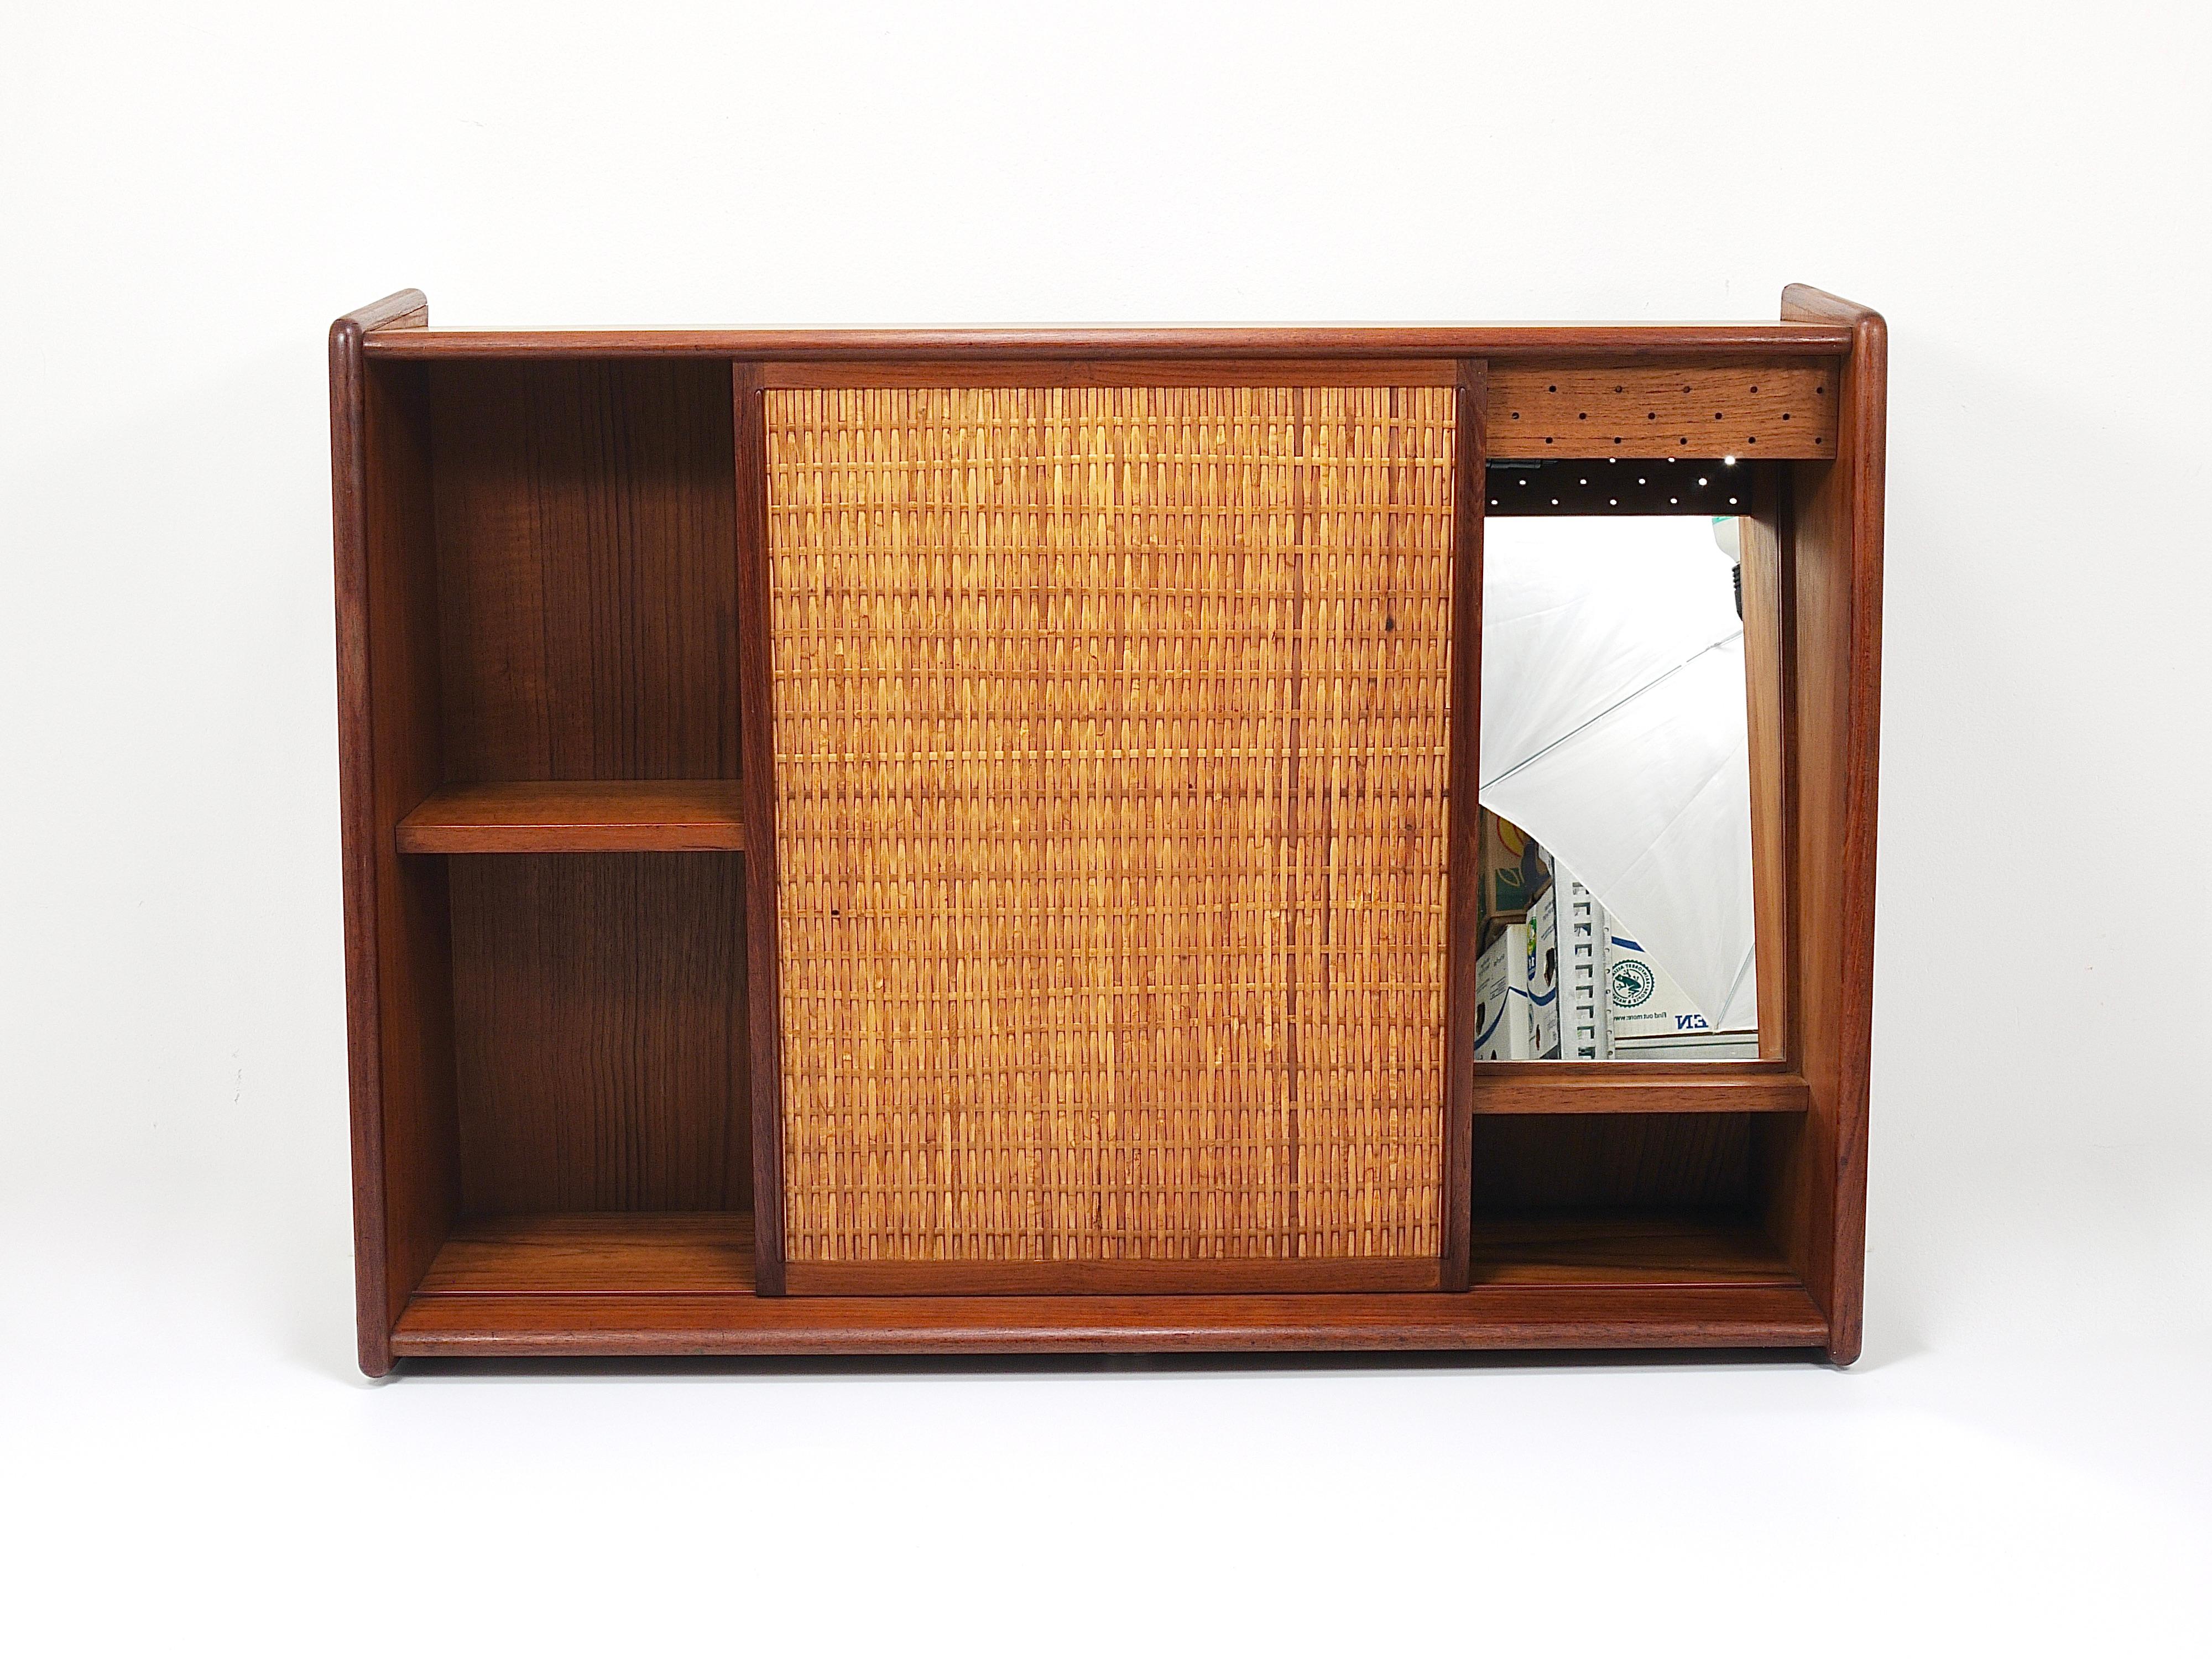 This beautifully restored Mid-Century Danish Modern wall-mounted hallway cabinet, designed by Arne Wahl Iversen and manufactured by Brenderup Møbelfabrik in Denmark, combines functionality and aesthetics. It features an illuminated vanity mirror,